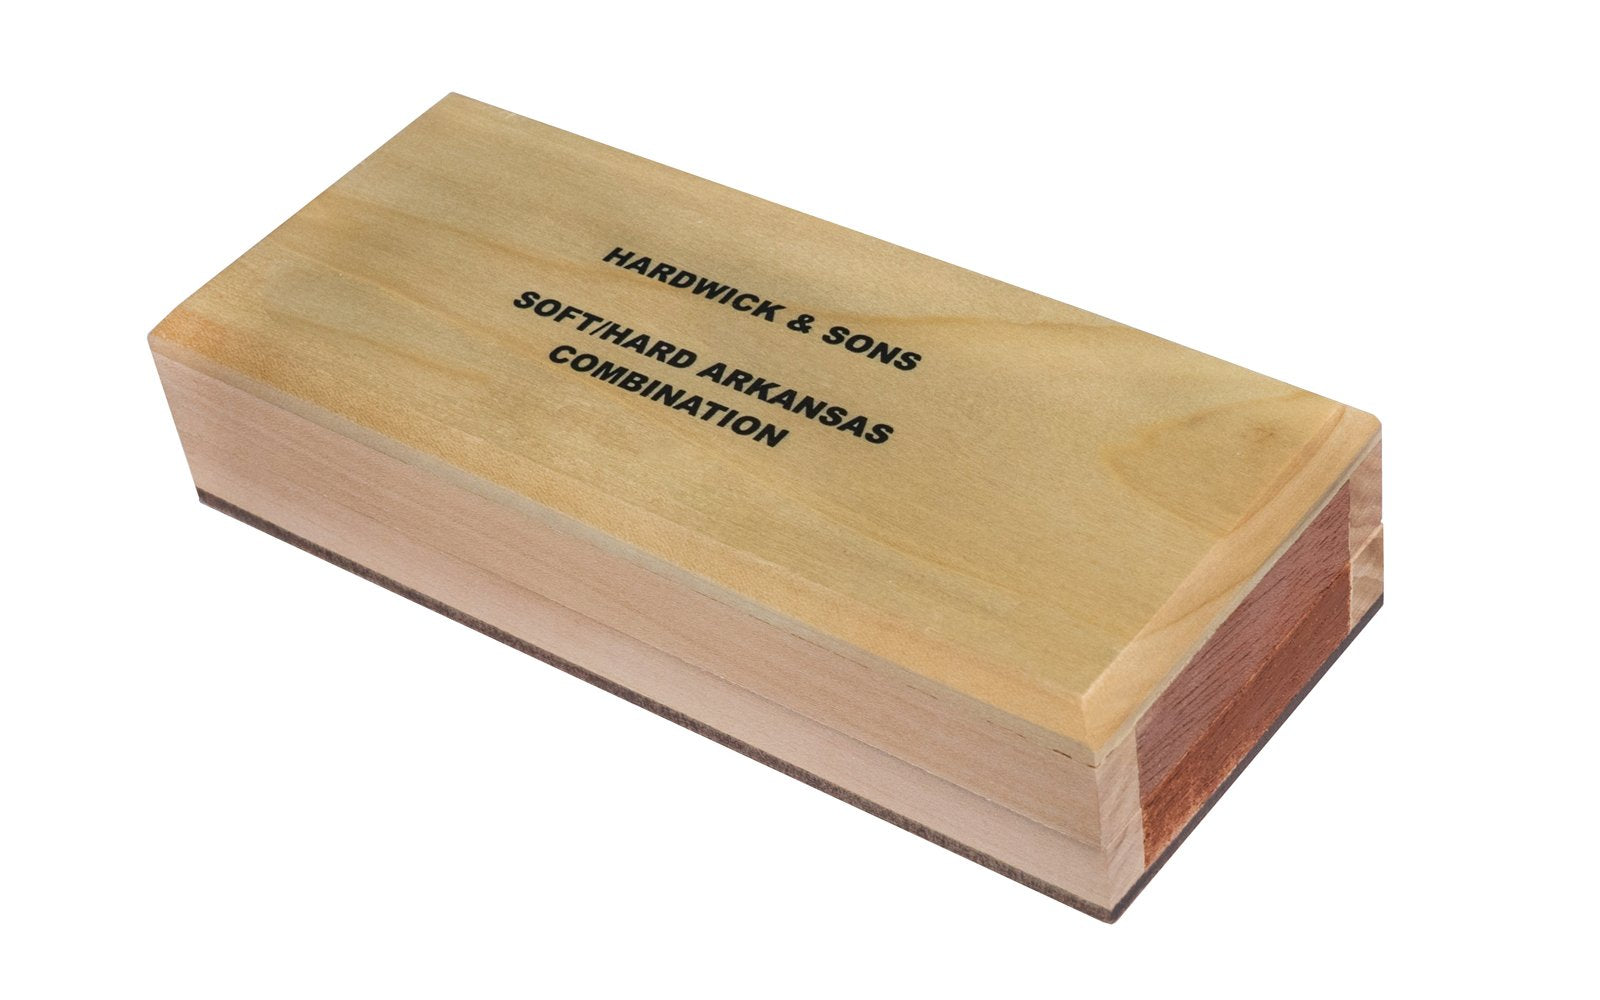 Soft/Hard Combination Arkansas Bench Stone with Wooden Box ~ 6" x 2" x 1" - Made in USA ~ Combo Hard & Soft Arkansas Stone Kit - Soft Arkansas: Extra-fine stone is good for starting an edge on tools - Hard Arkansas: Super-fine stone that is satisfactory for the final edge - Model No. MFC-6-C